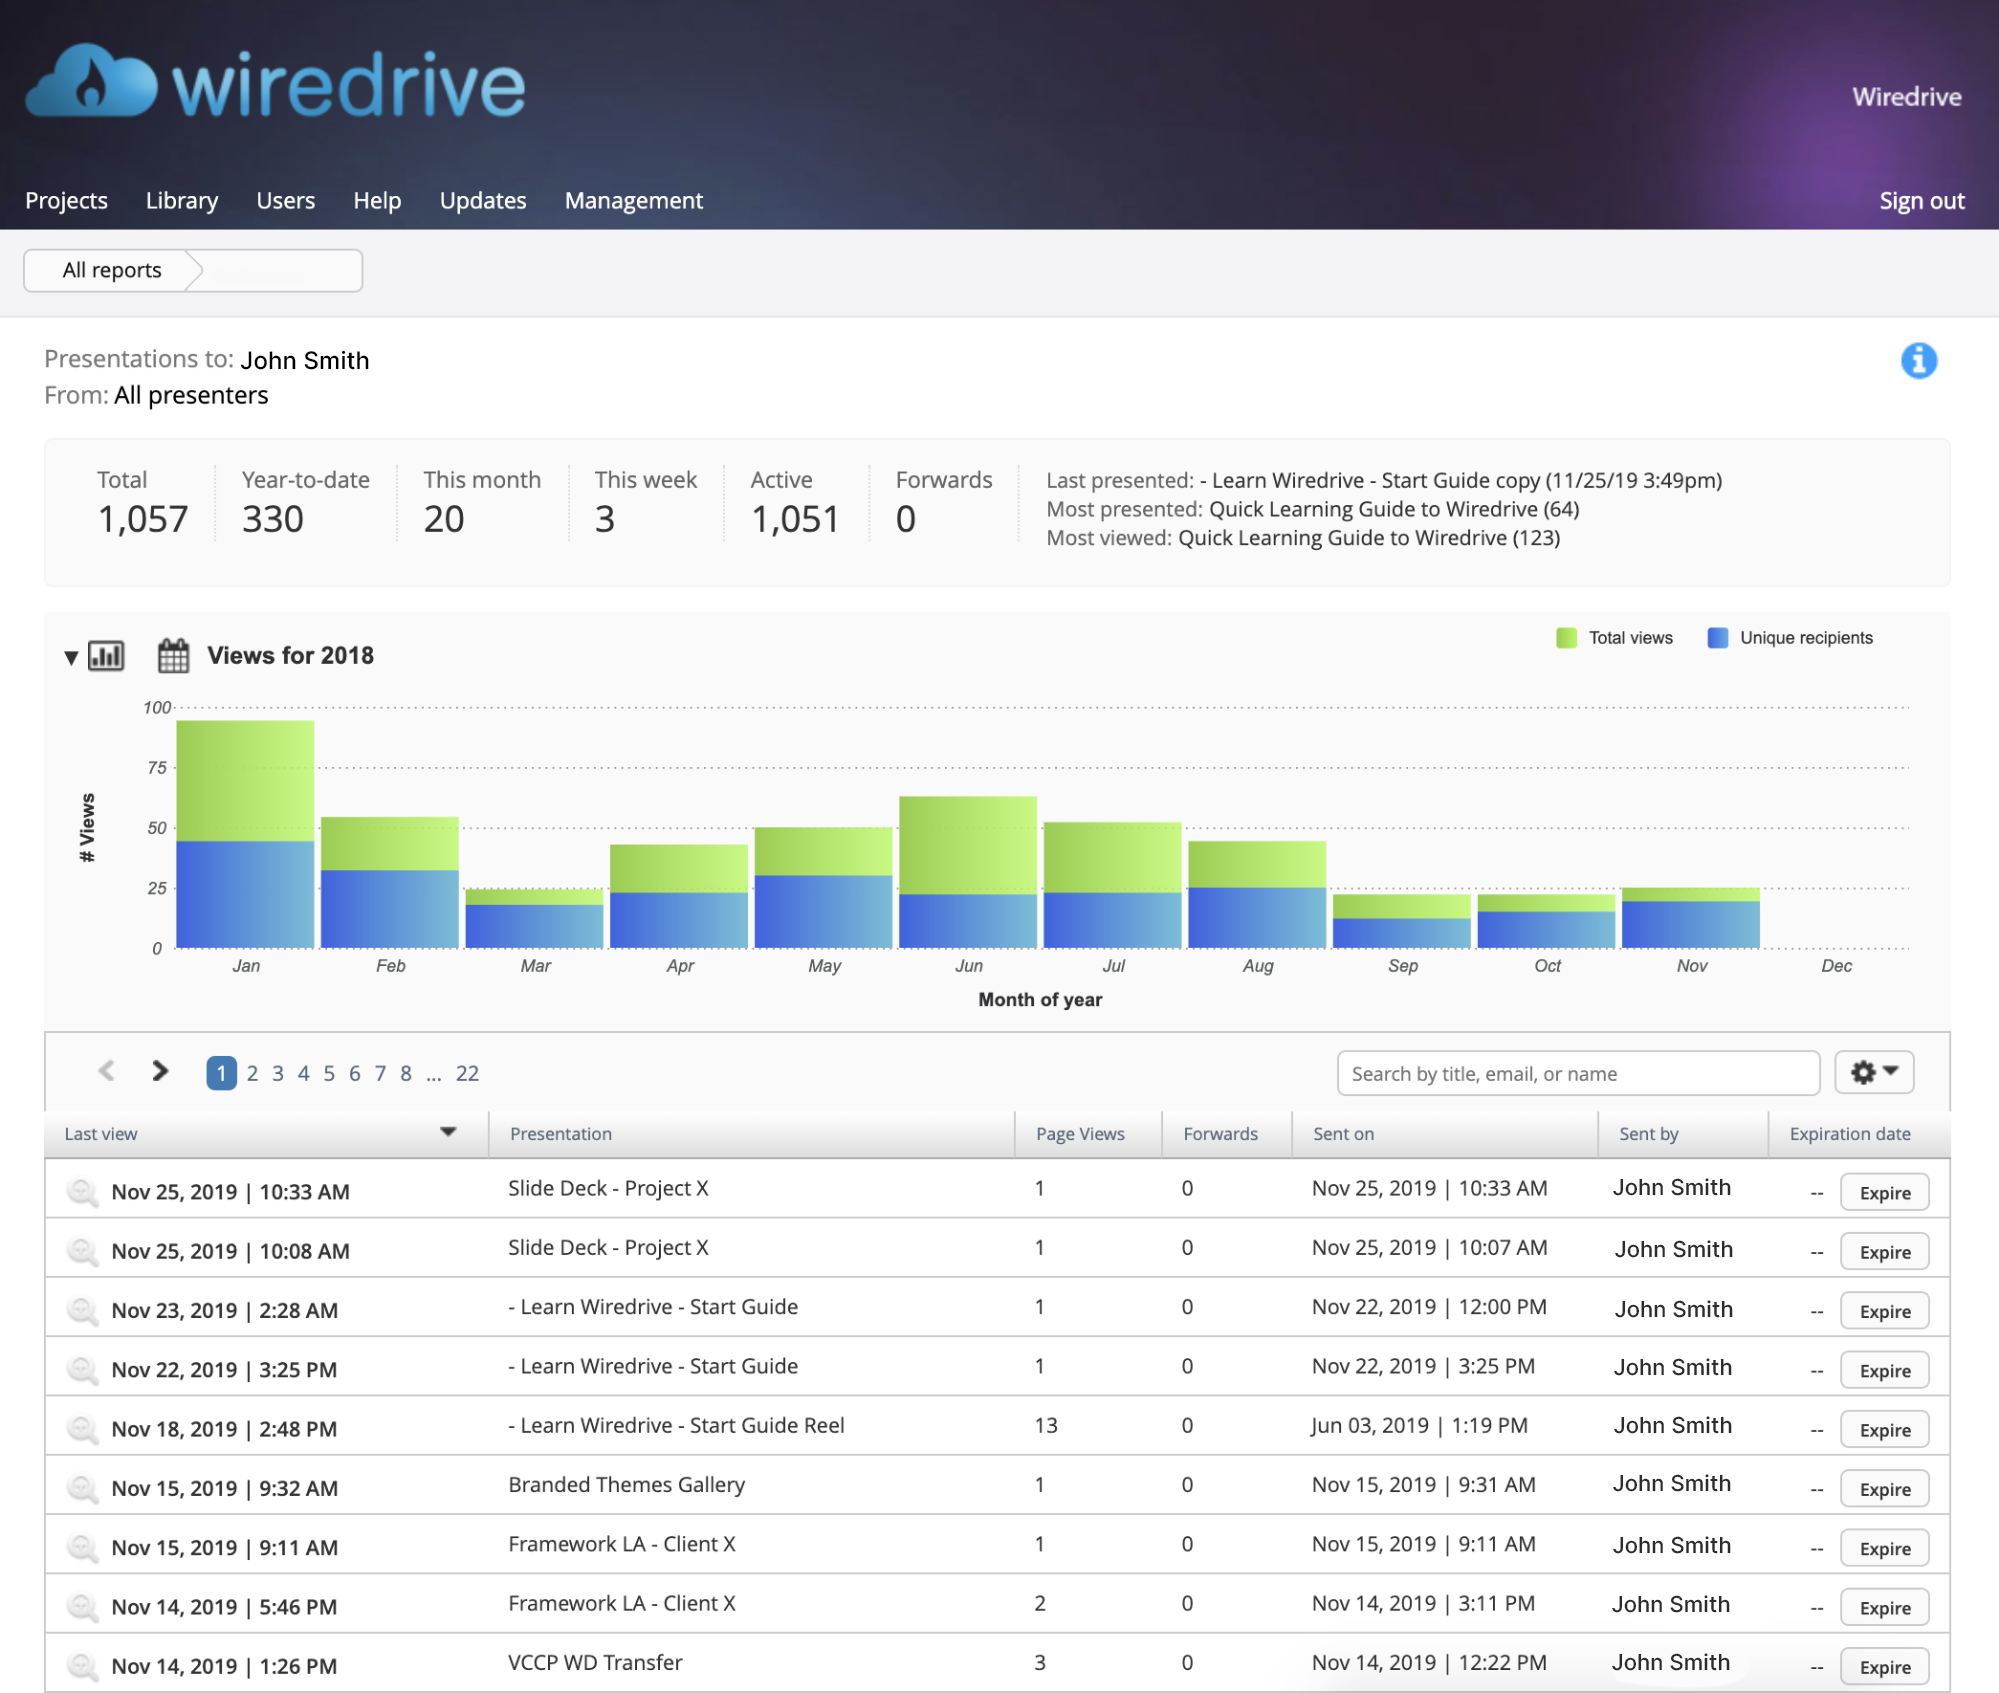 Wiredrive features comprehensive and intuitive analytics reporting